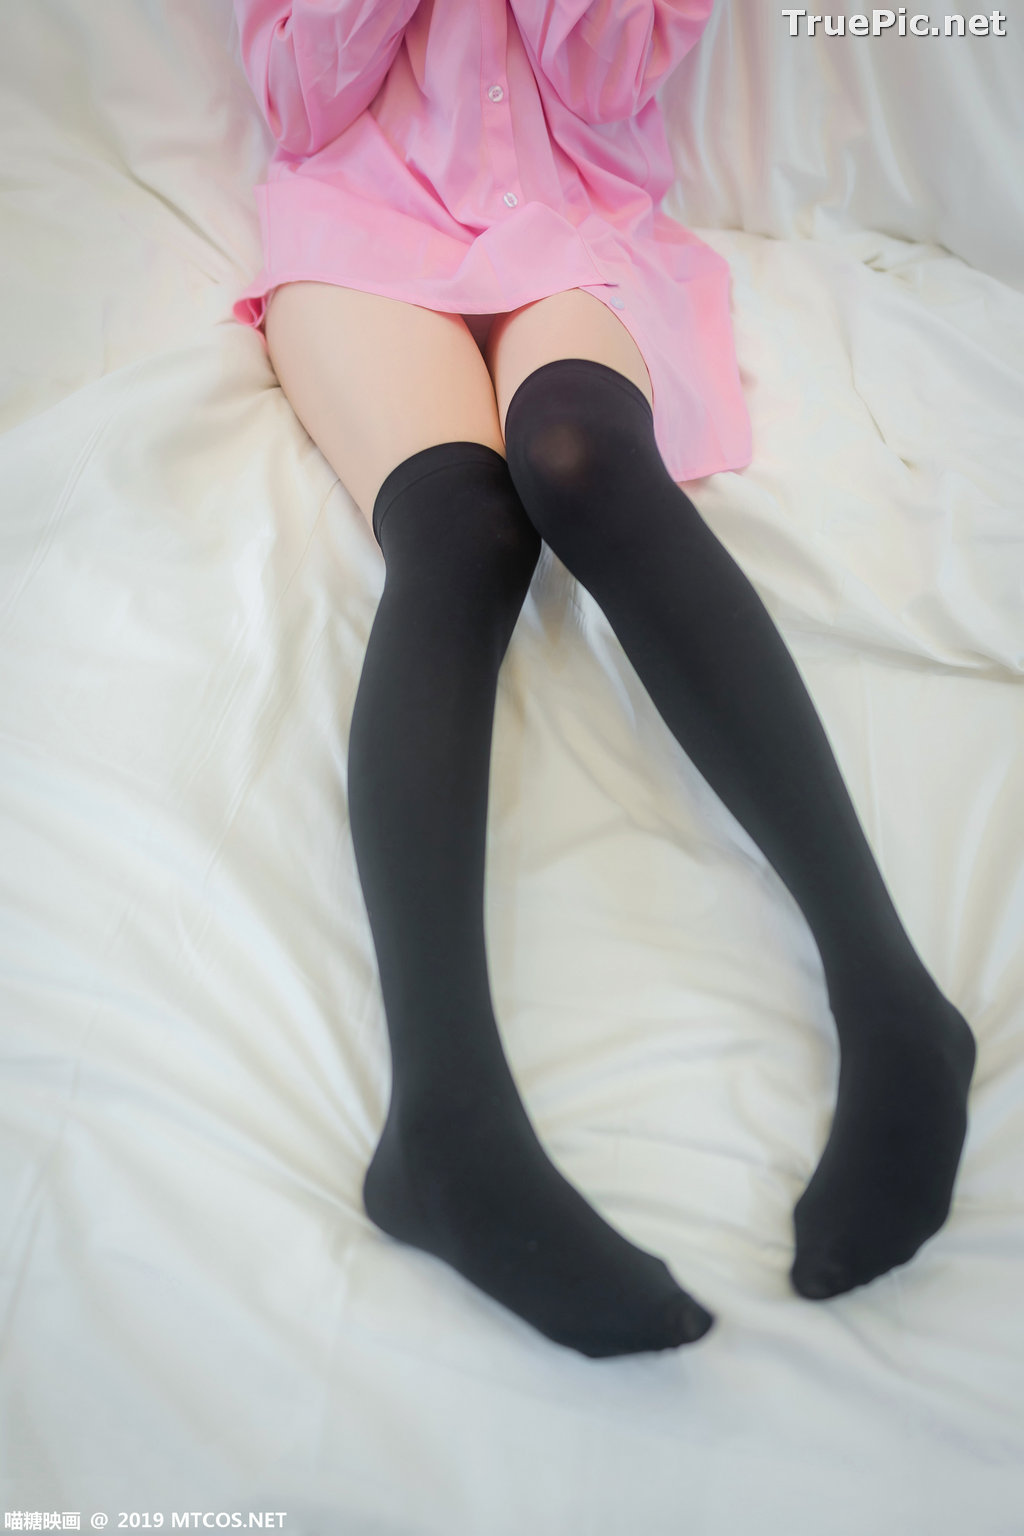 Image [MTCos] 喵糖映画 Vol.022 – Chinese Model – Pink Shirt and Black Stockings - TruePic.net - Picture-21